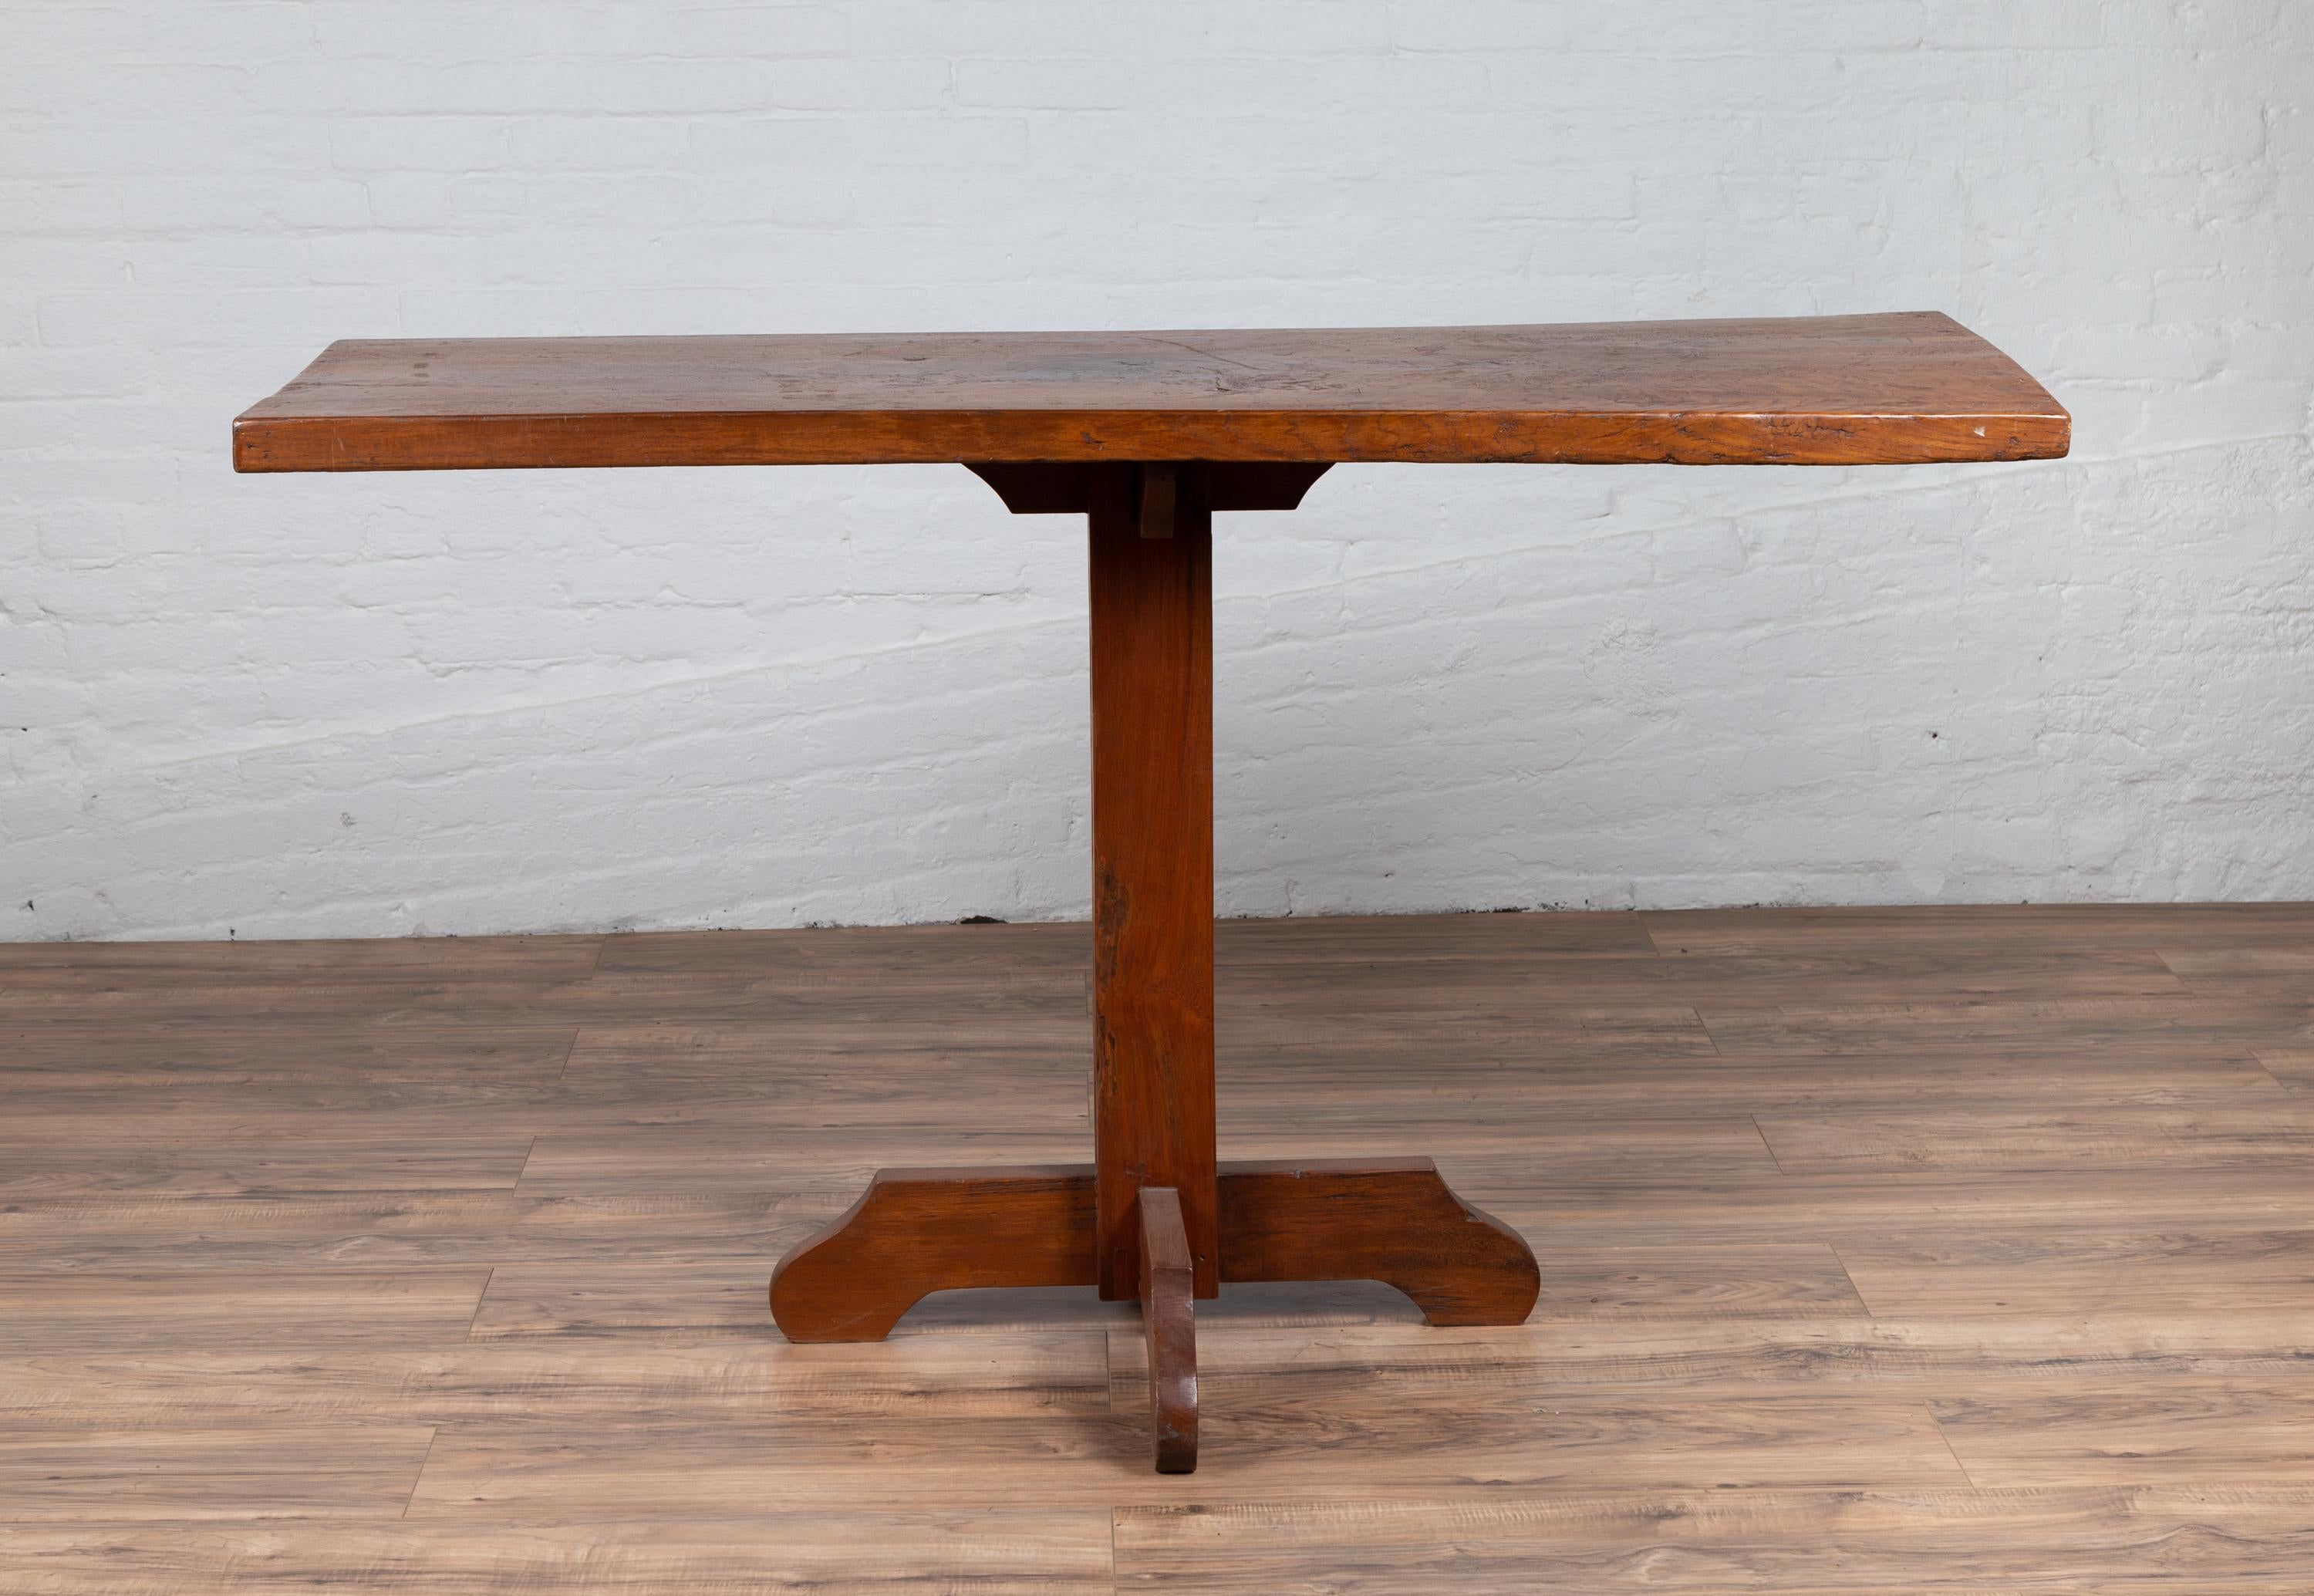 An antique Indonesian rustic console table from the early 20th century, with single plank top and quadripod base. Born in Indonesia during the early years of the 20th century, this console table charms us with its unpretentious look and rustic